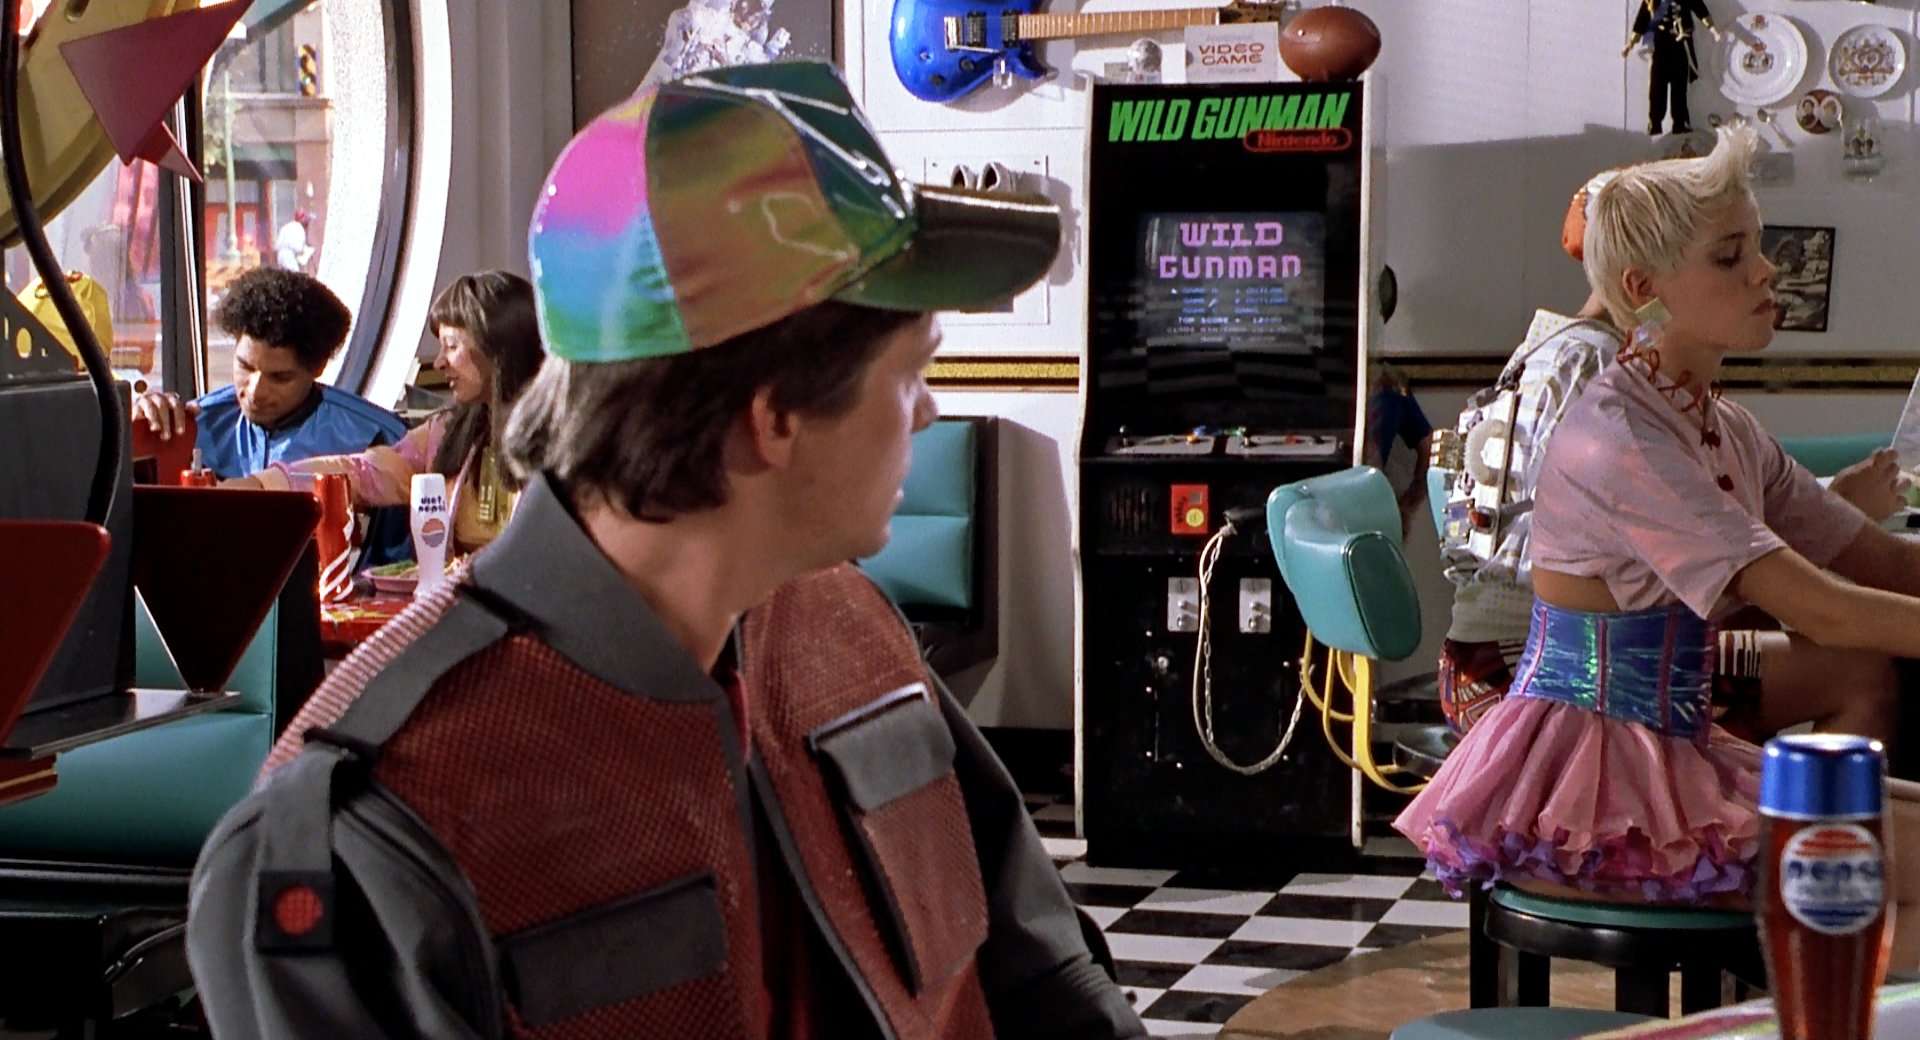 image for In Back to the Future II when they go to 2015, one of the little details is inflation, where it cost Marty $2 dollars for a Pepsi (¢0.50 in 1985)